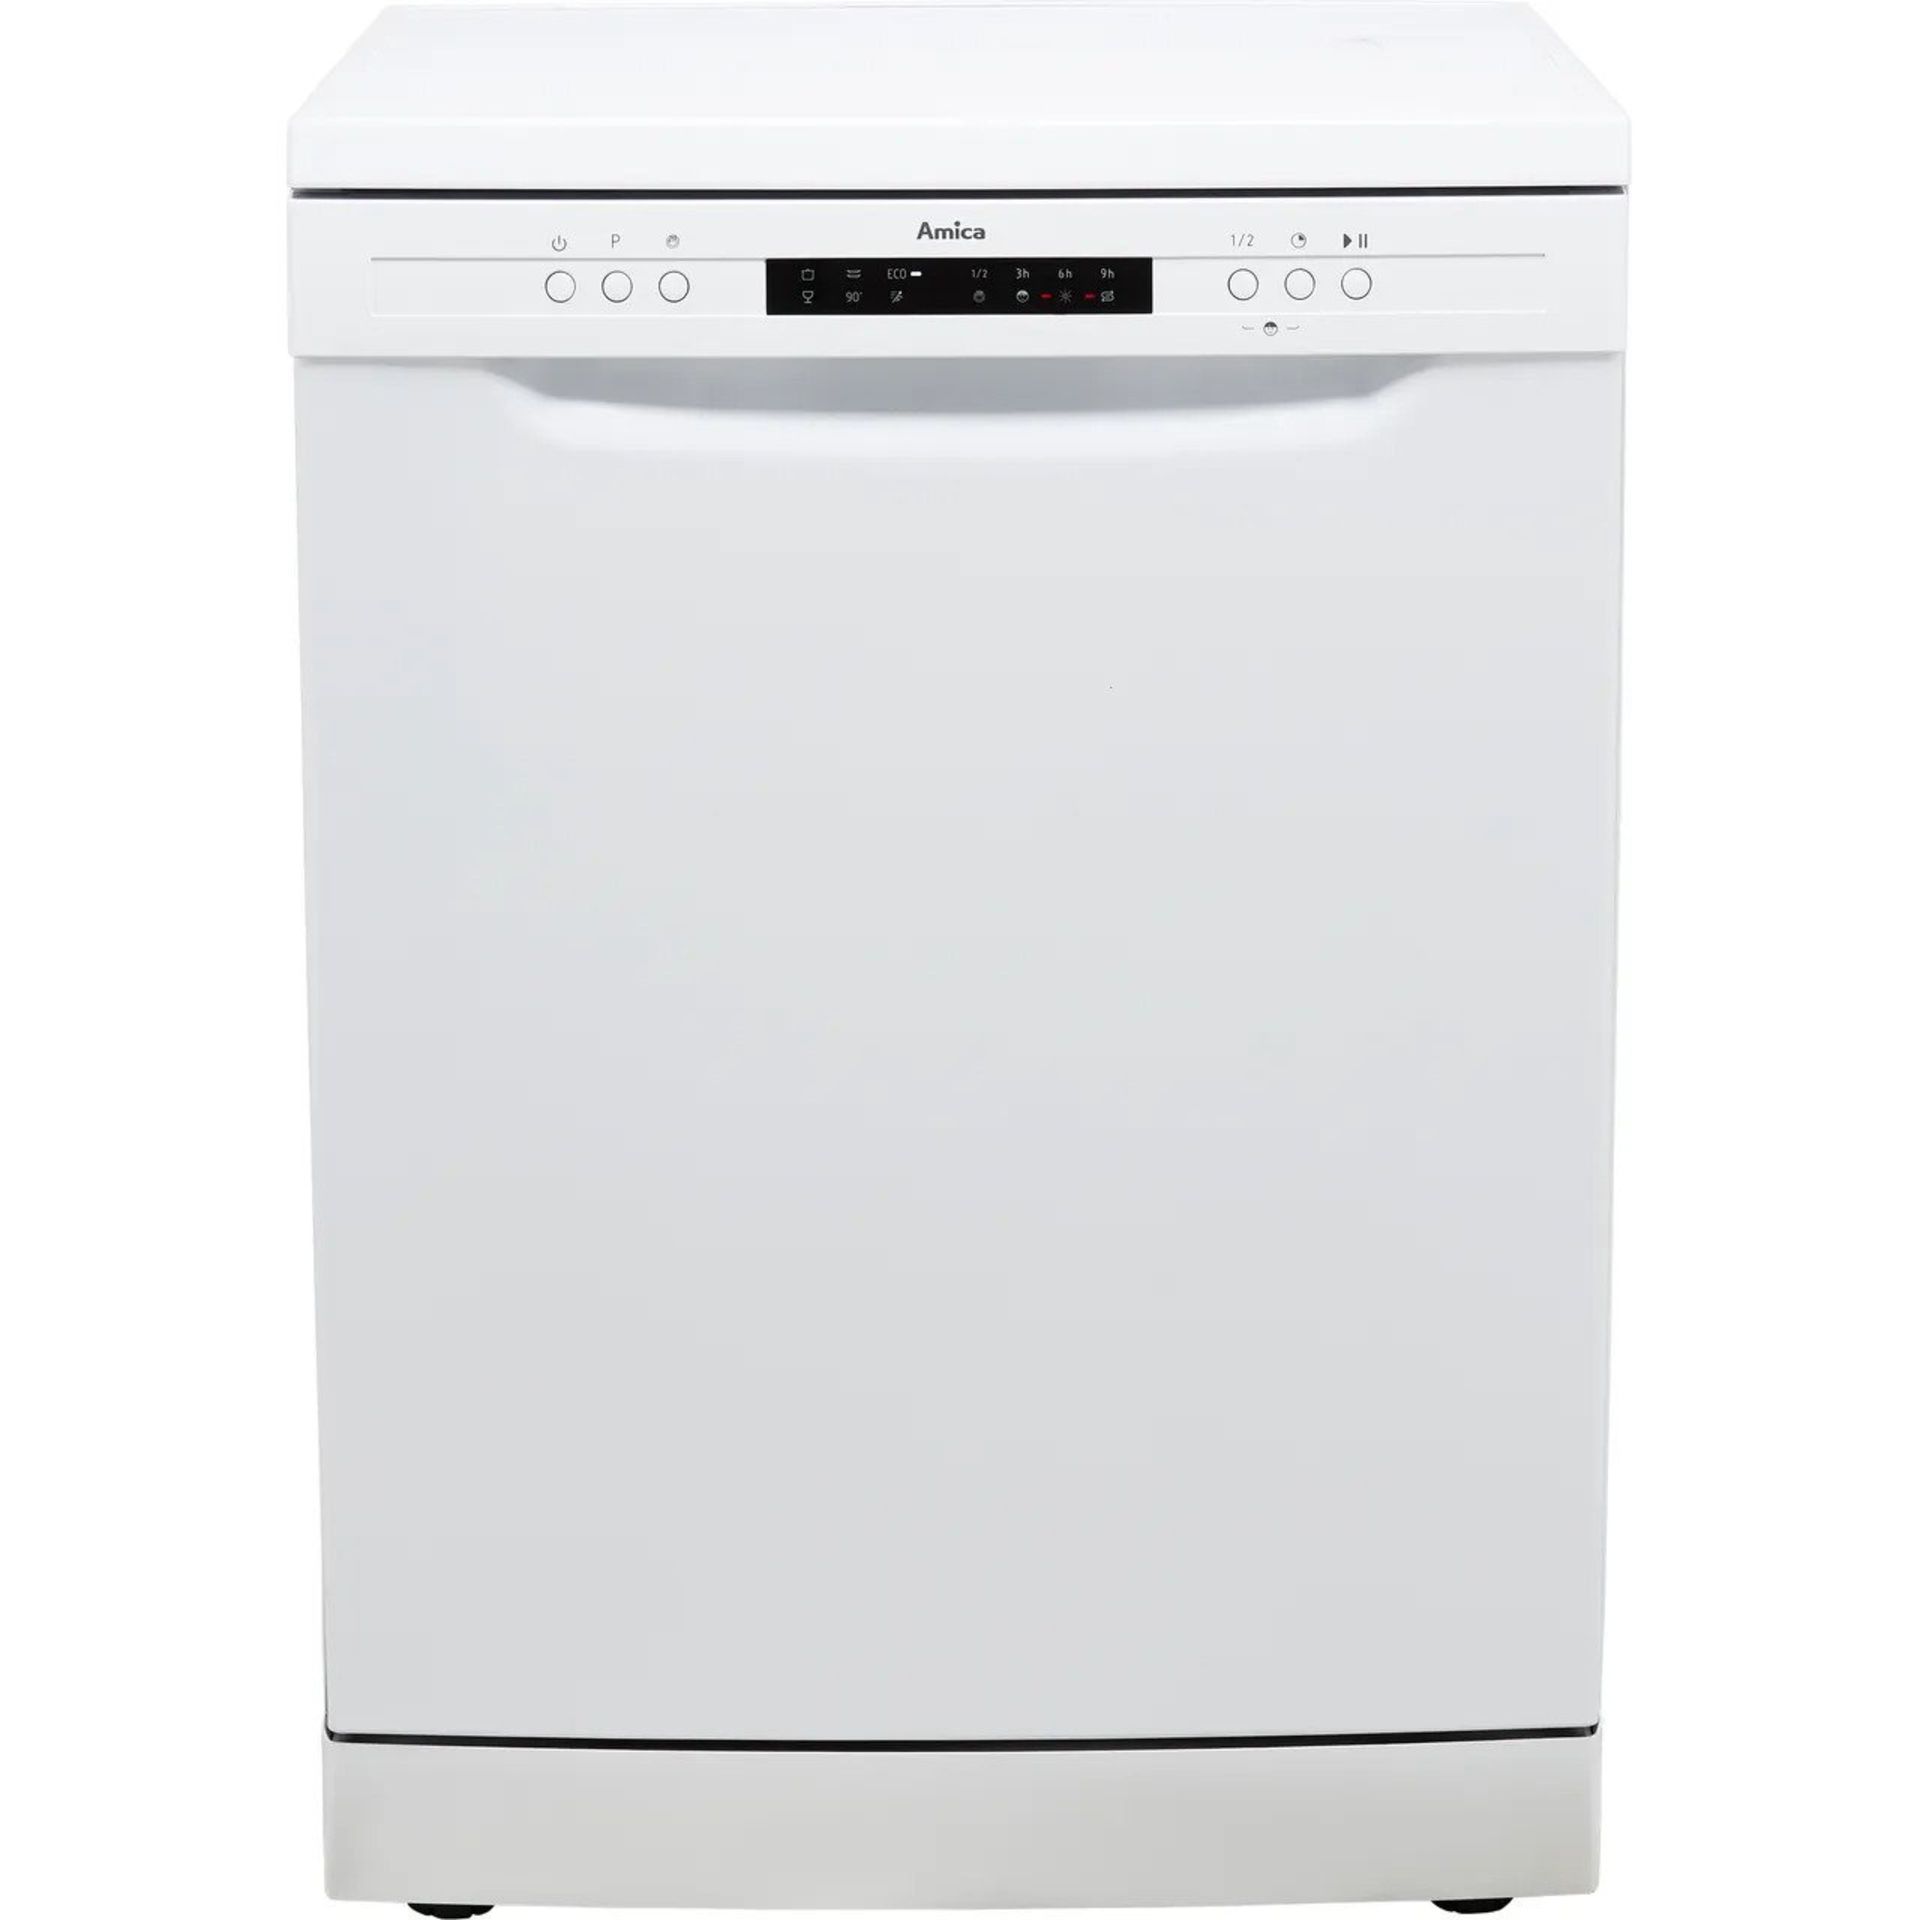 + VAT Grade B ISP £269 - Amica ADF650WH Dishwasher - 13 Place Settings - 30 Minute Quick Wash -